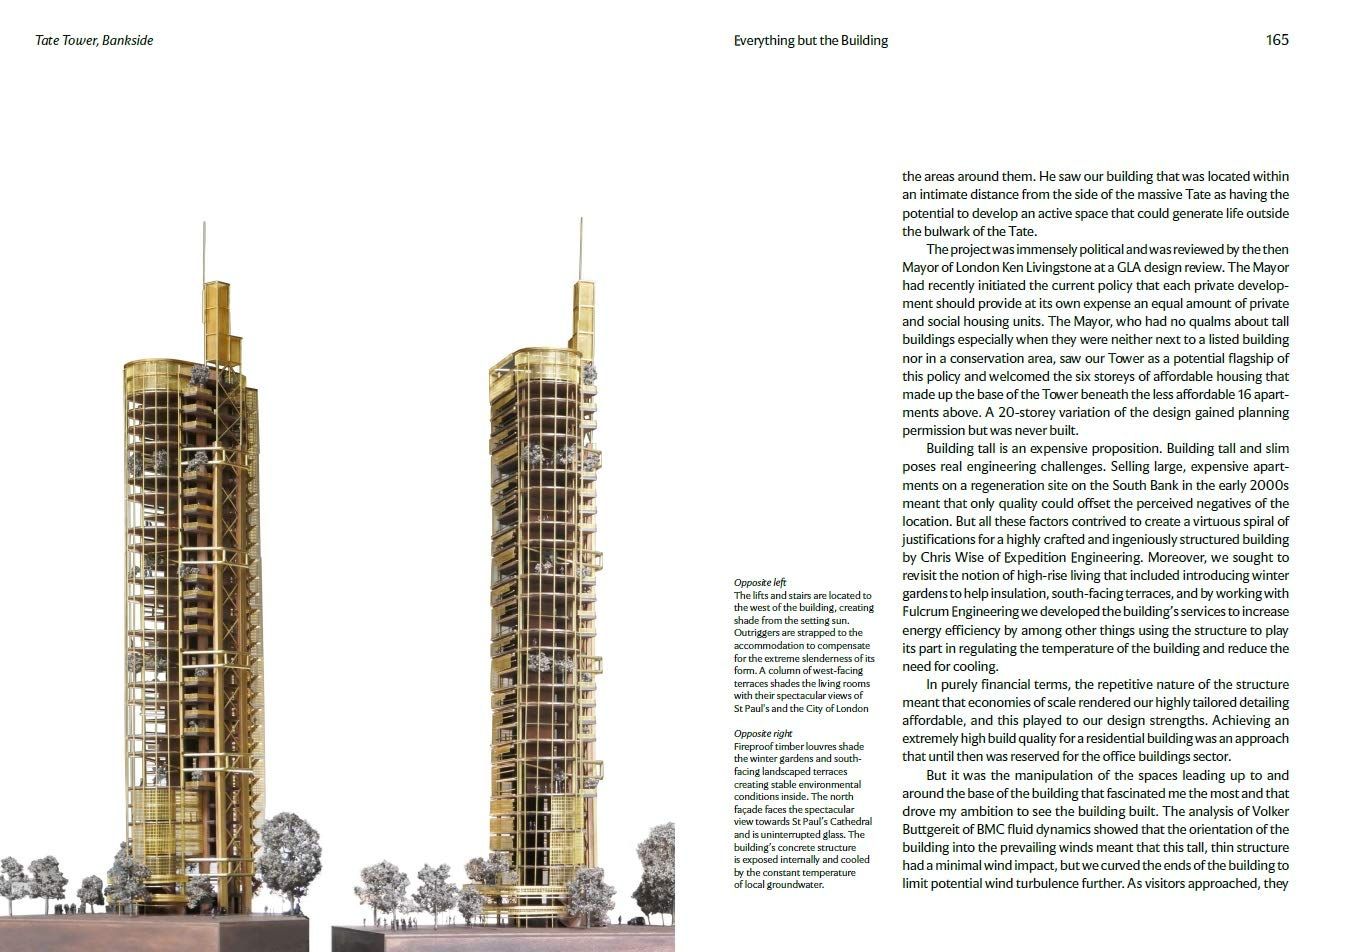  Sensing Place: What is the Point of Architecture?_Philip Gumuchdjian_9781999858377_Thames & Hudson 